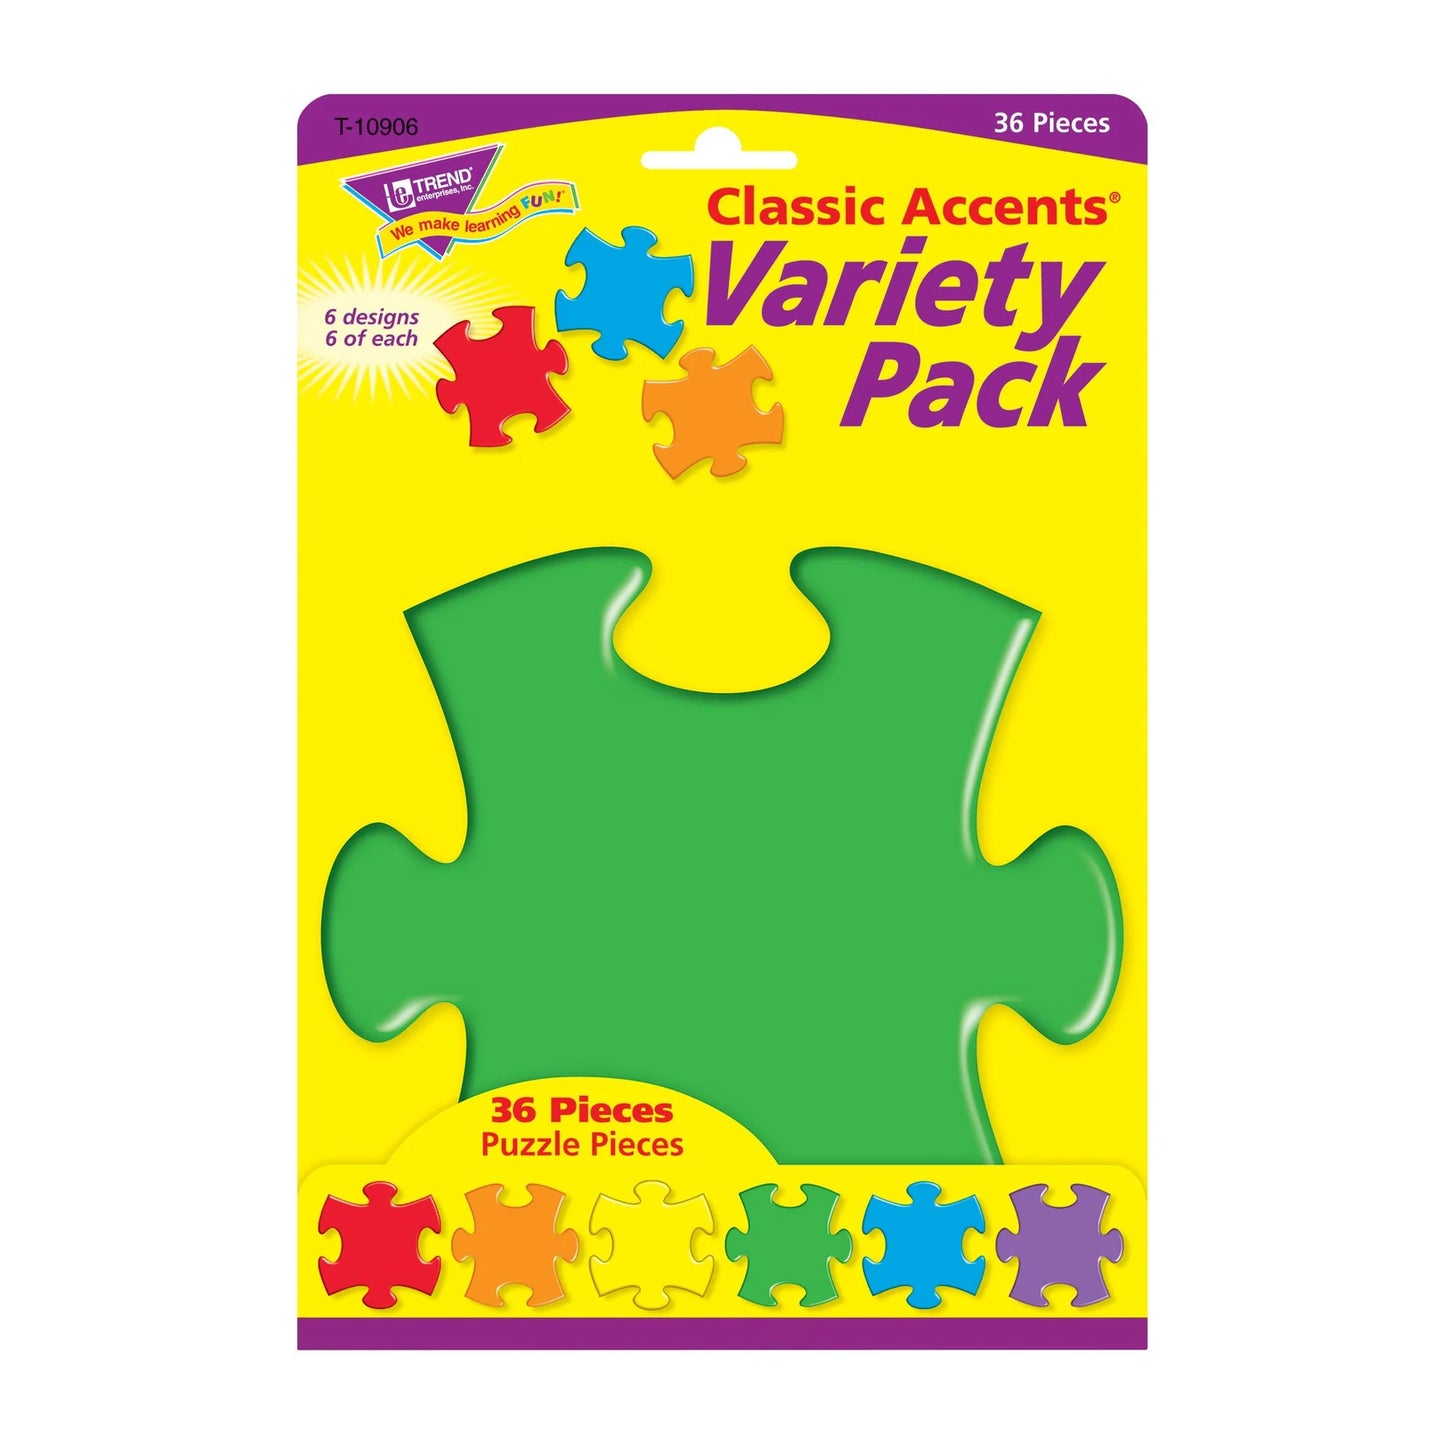 Puzzle Pieces Classic Accents® Variety Pack